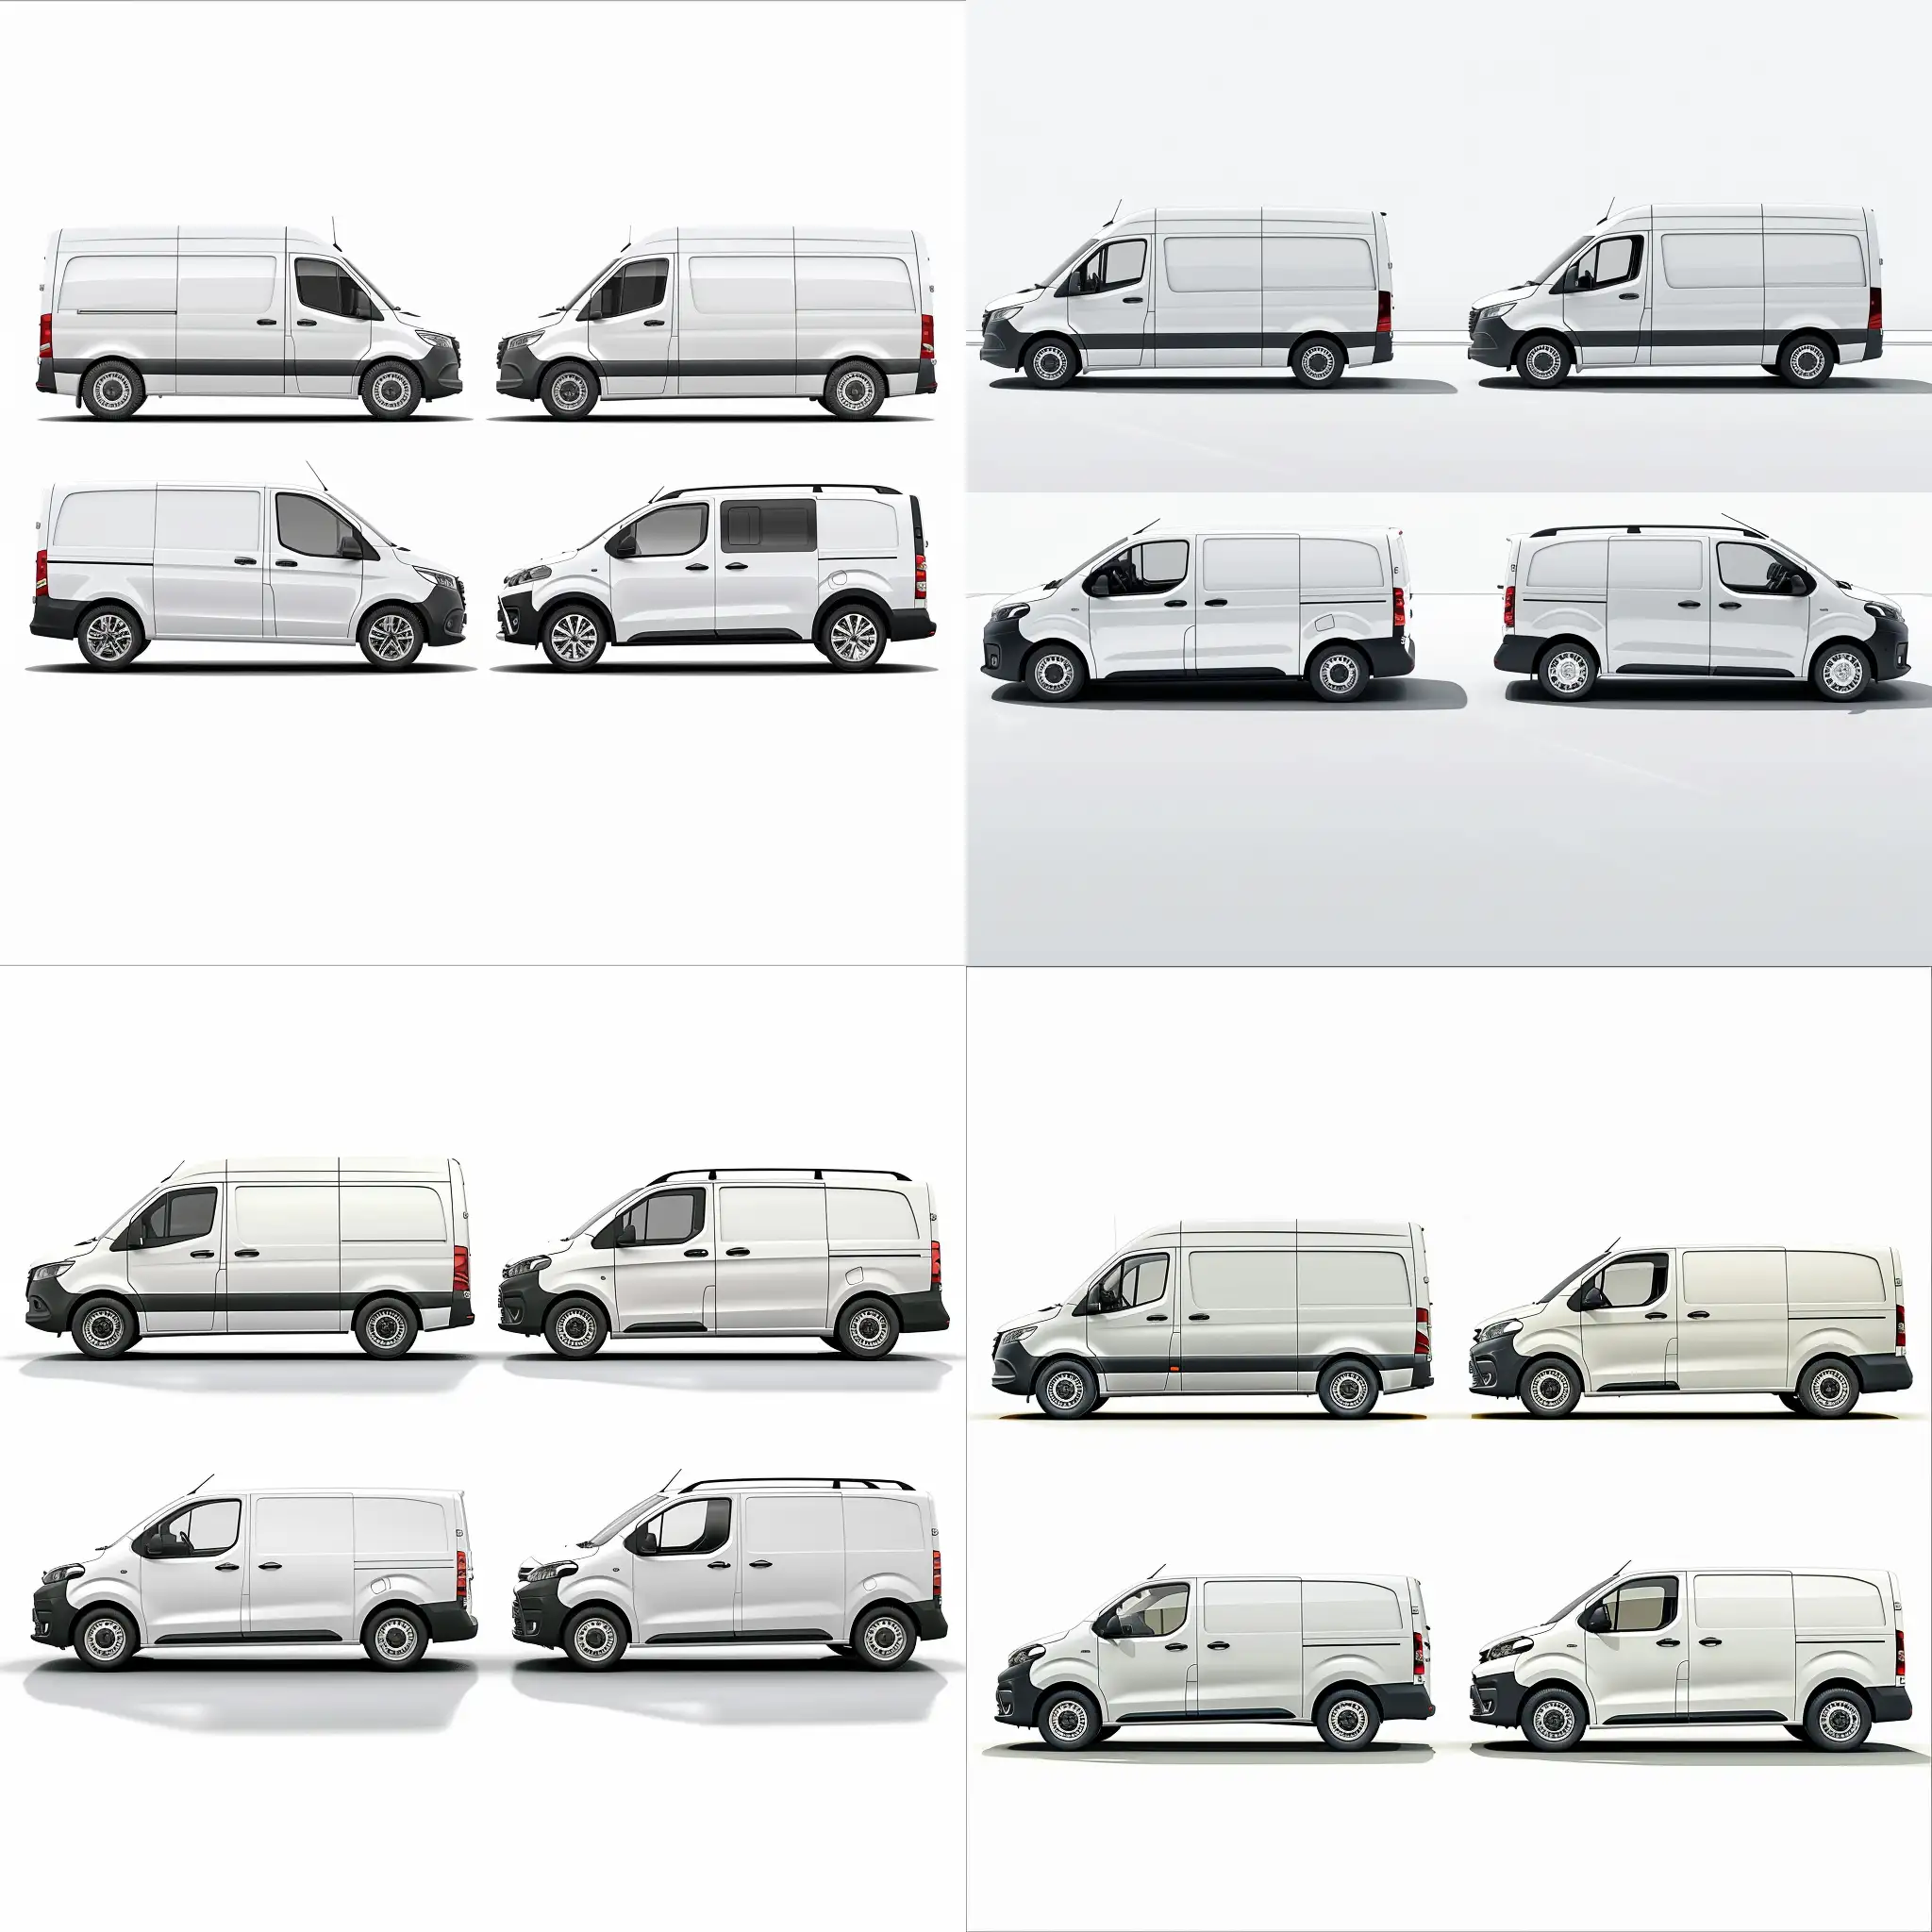 Make a picture of 4 different cars seen from the side. All cars must be white. The background must be white. There must be natural shade under the cars. The cars must be a Mercedes Sprinter, Mercedes Vito, Toyota Proace and a Toyota RAV Hybrid